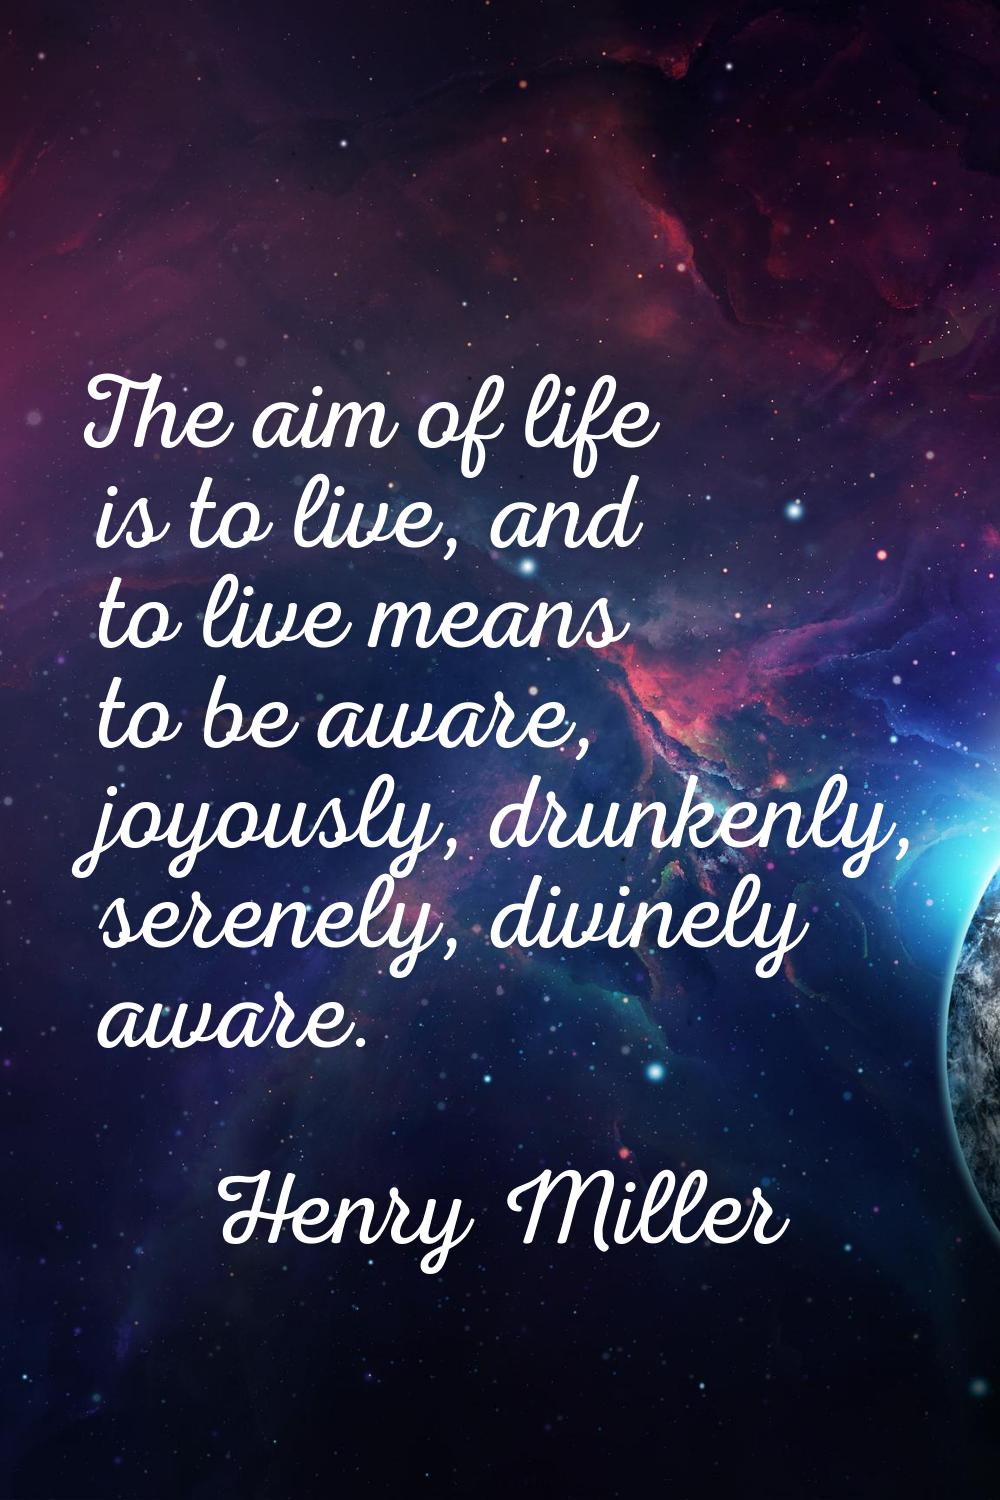 The aim of life is to live, and to live means to be aware, joyously, drunkenly, serenely, divinely 